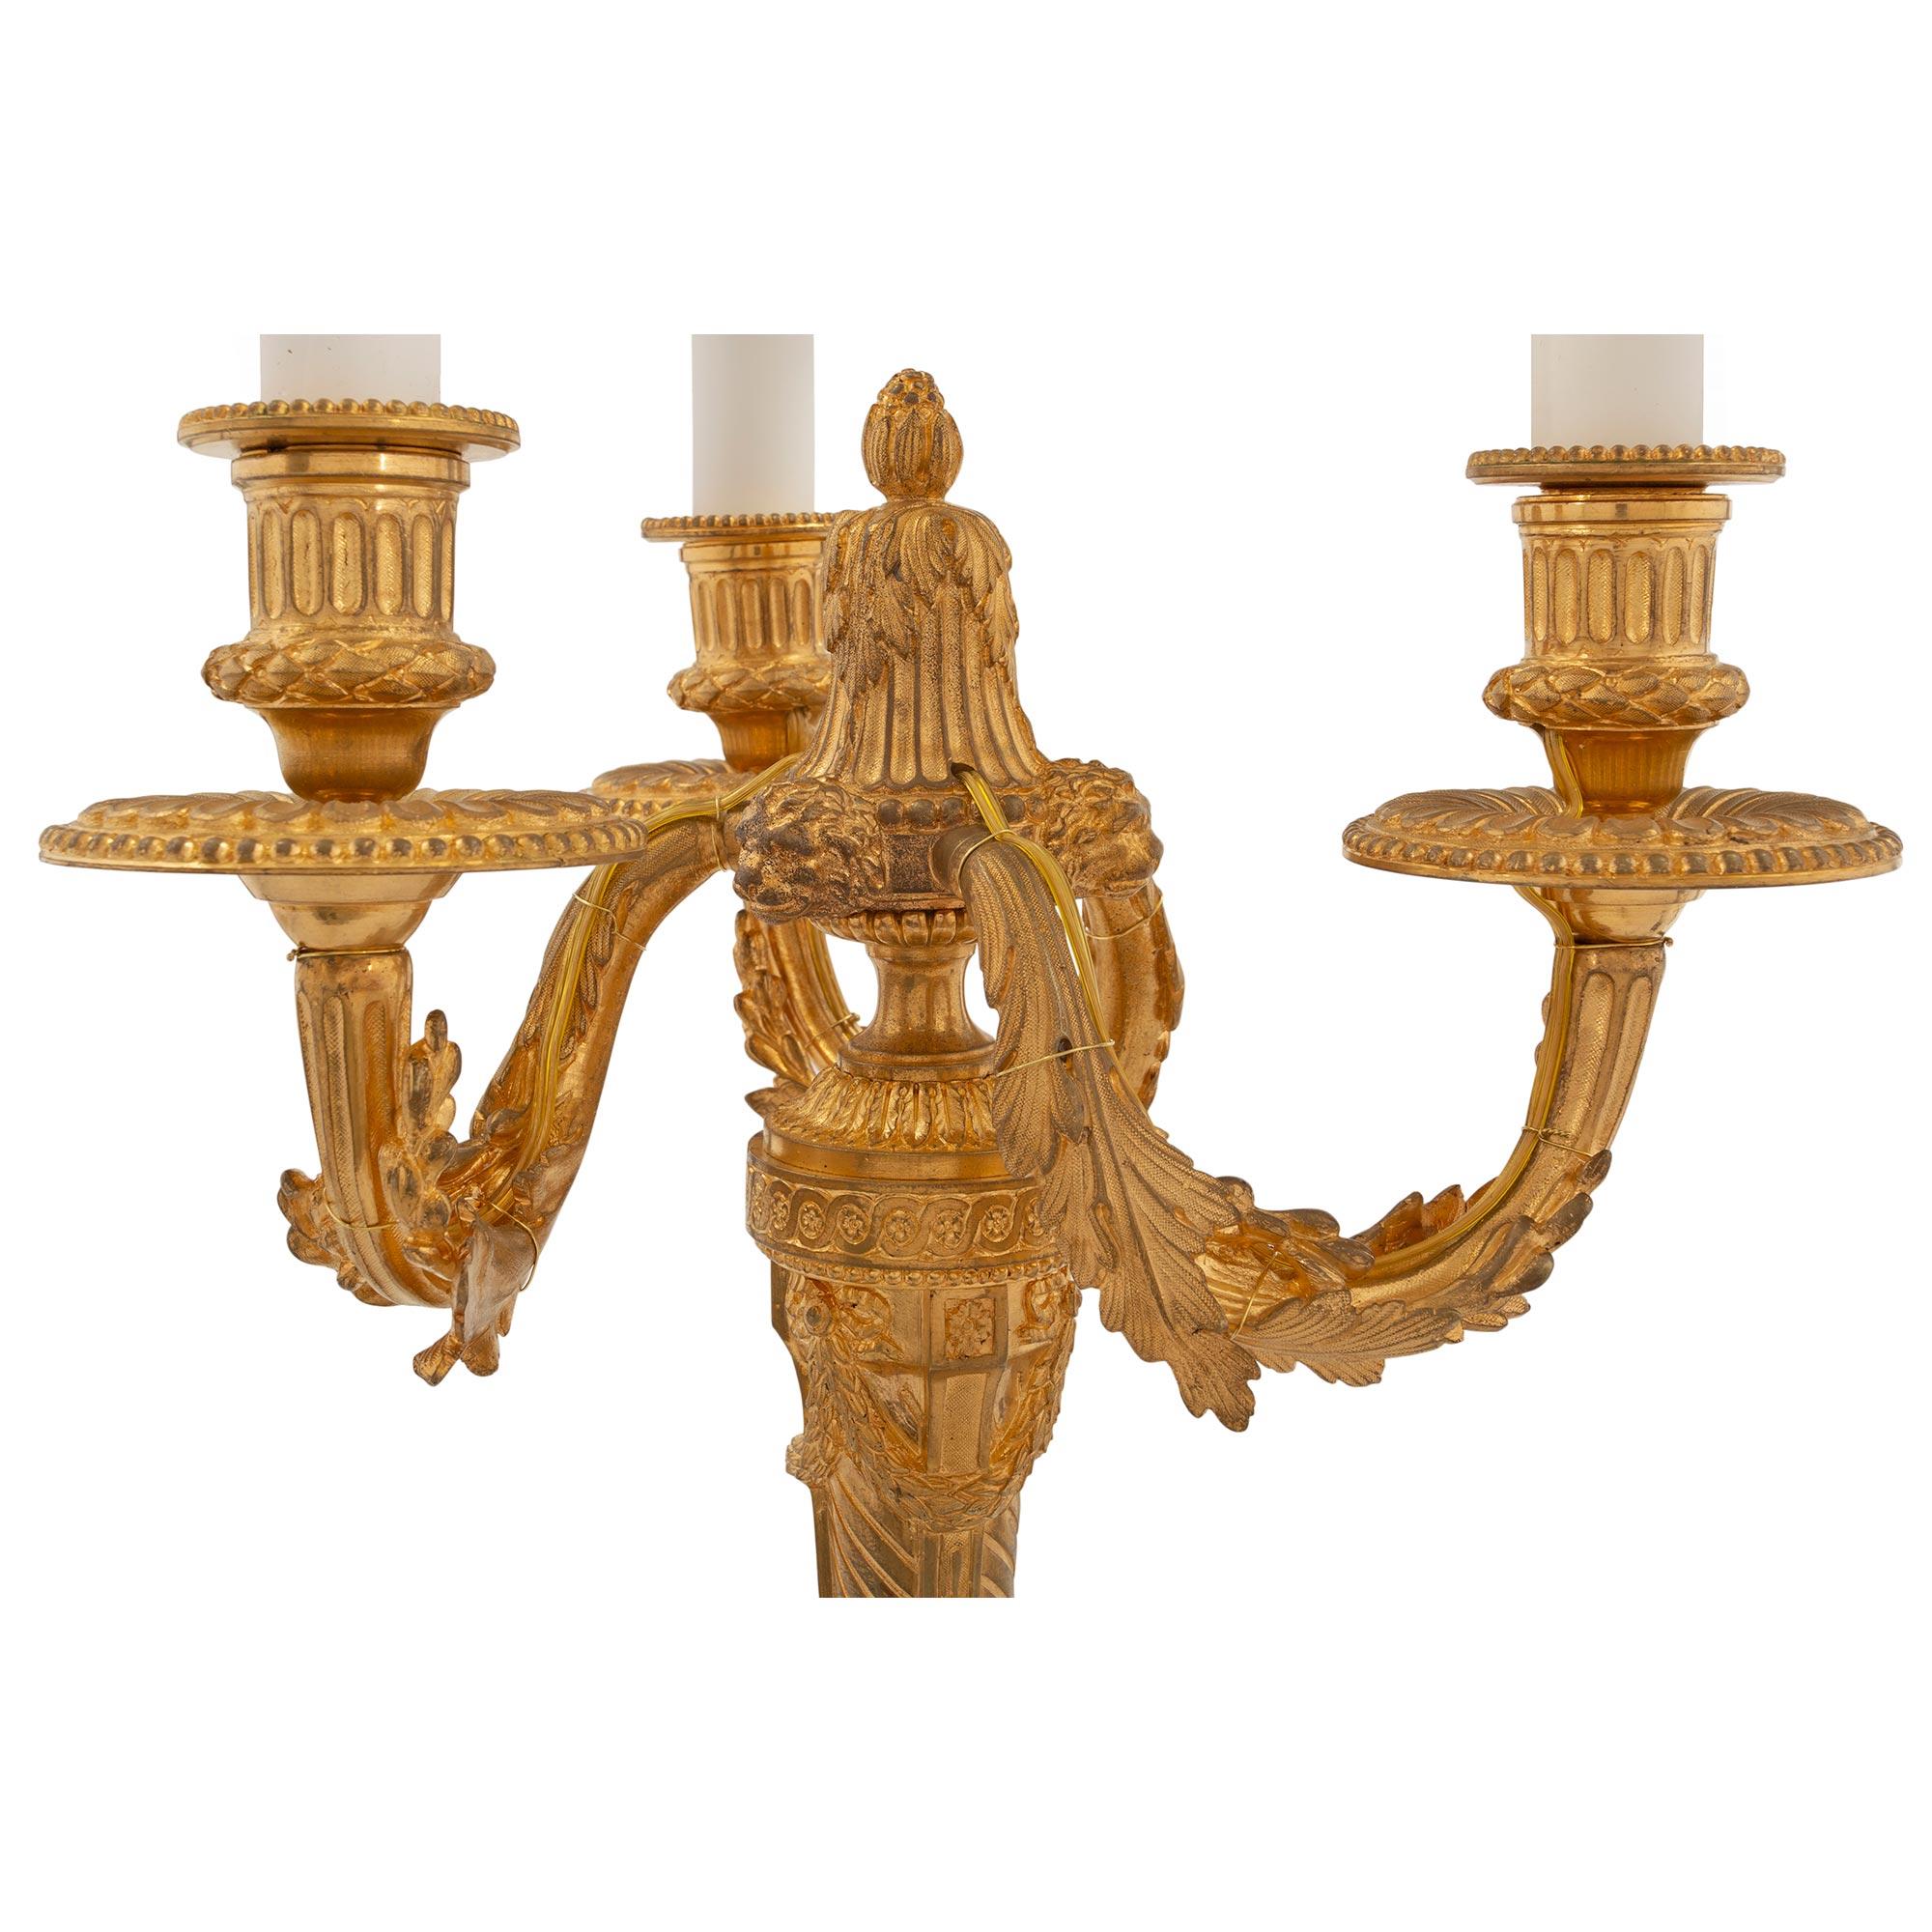 Pair of French 19th Century Louis XVI Style Ormolu and Marble Candelabras Lamps In Good Condition For Sale In West Palm Beach, FL